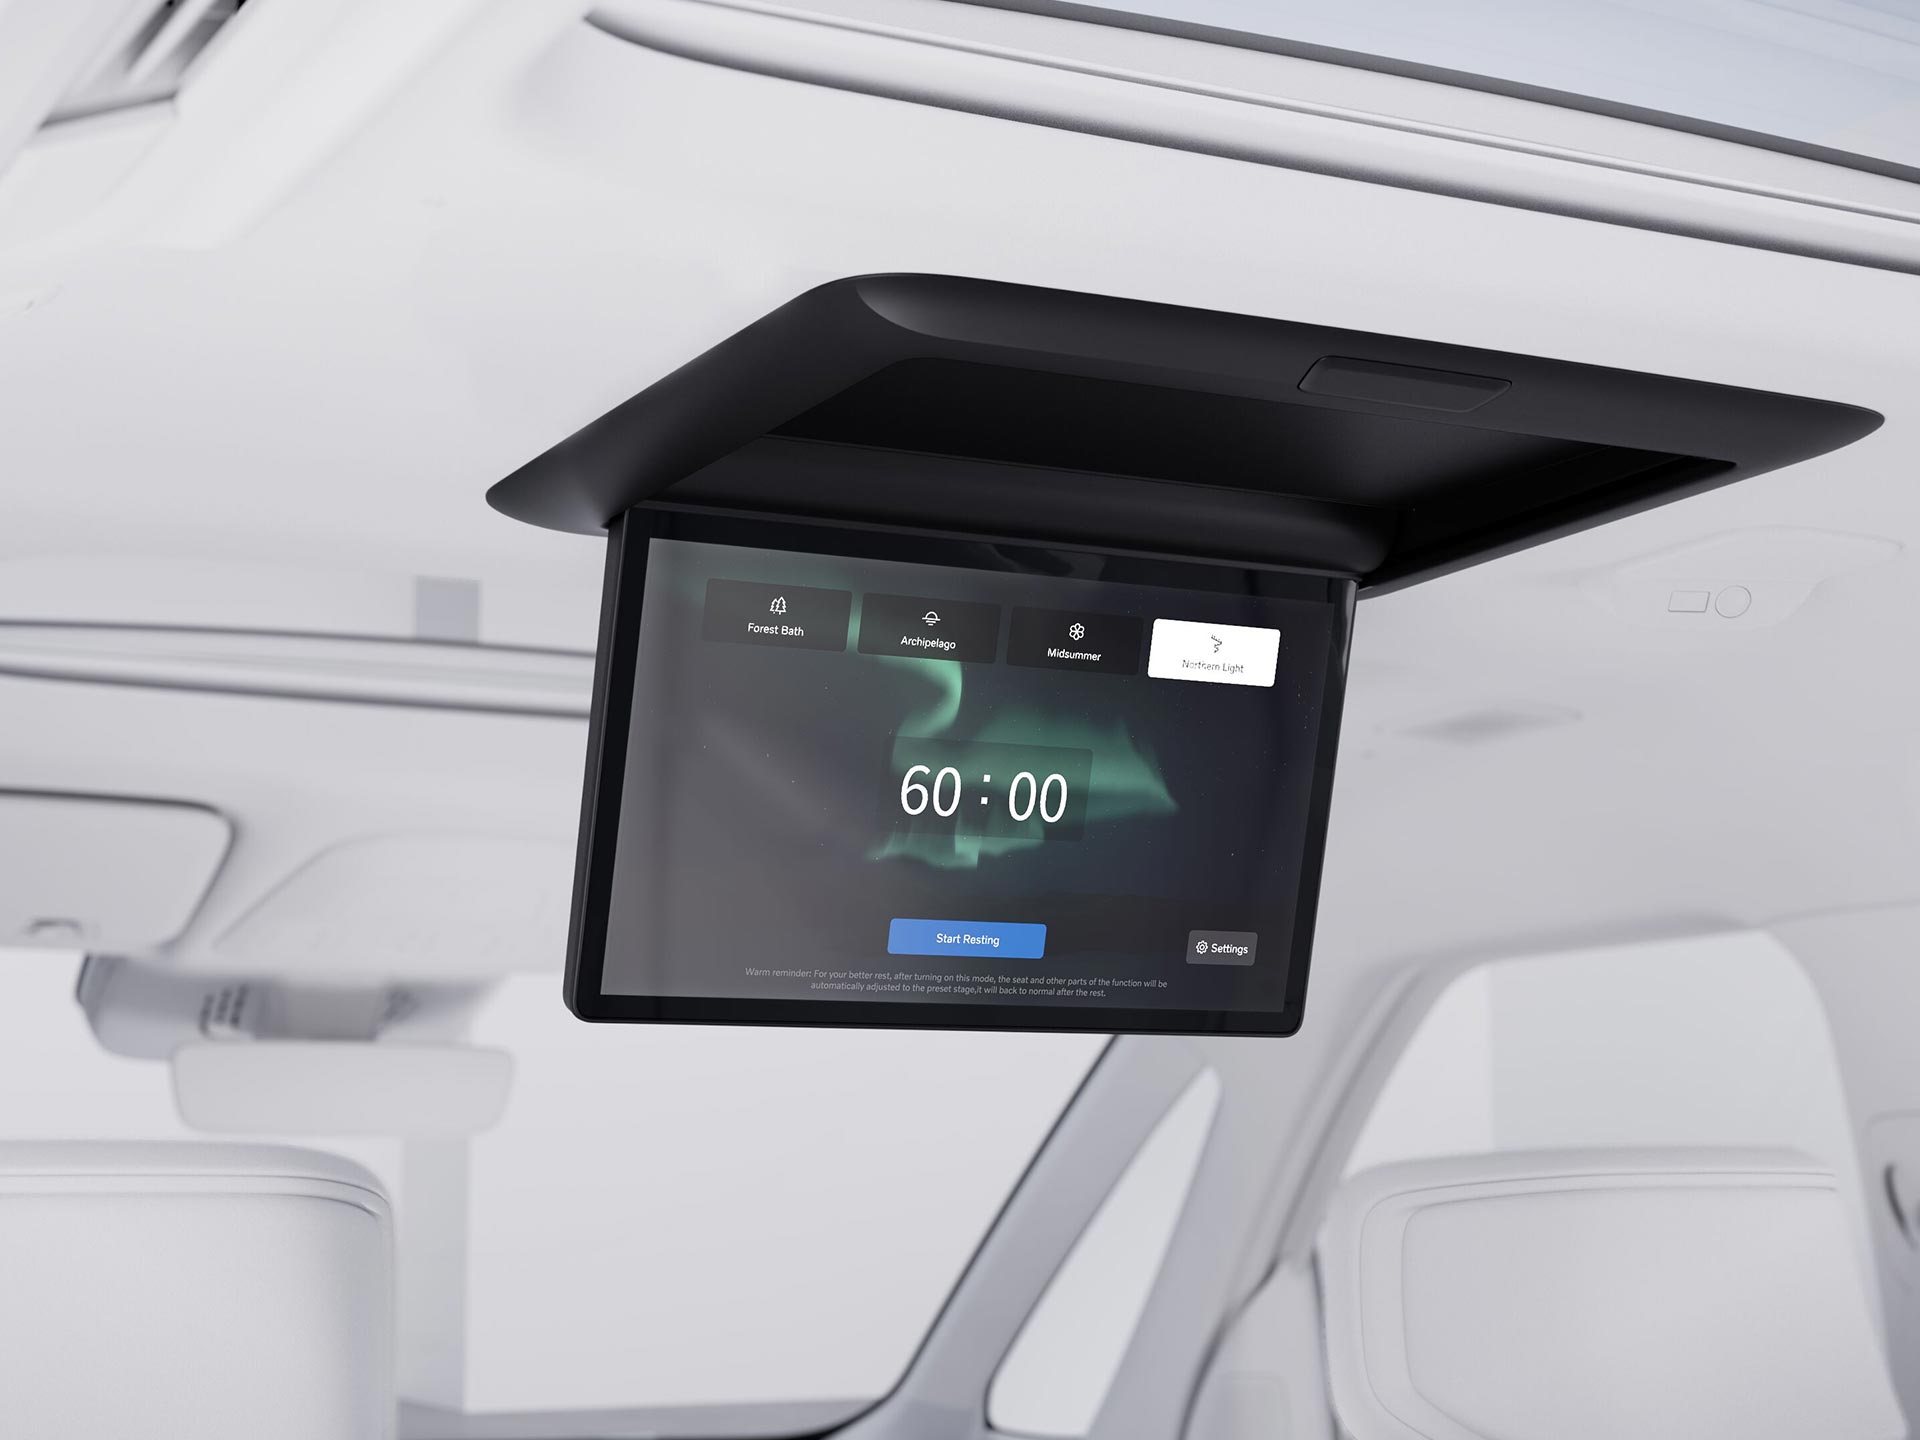 Image of the Volvo EM90 roof display folded down and showing the Rest Mode interface.